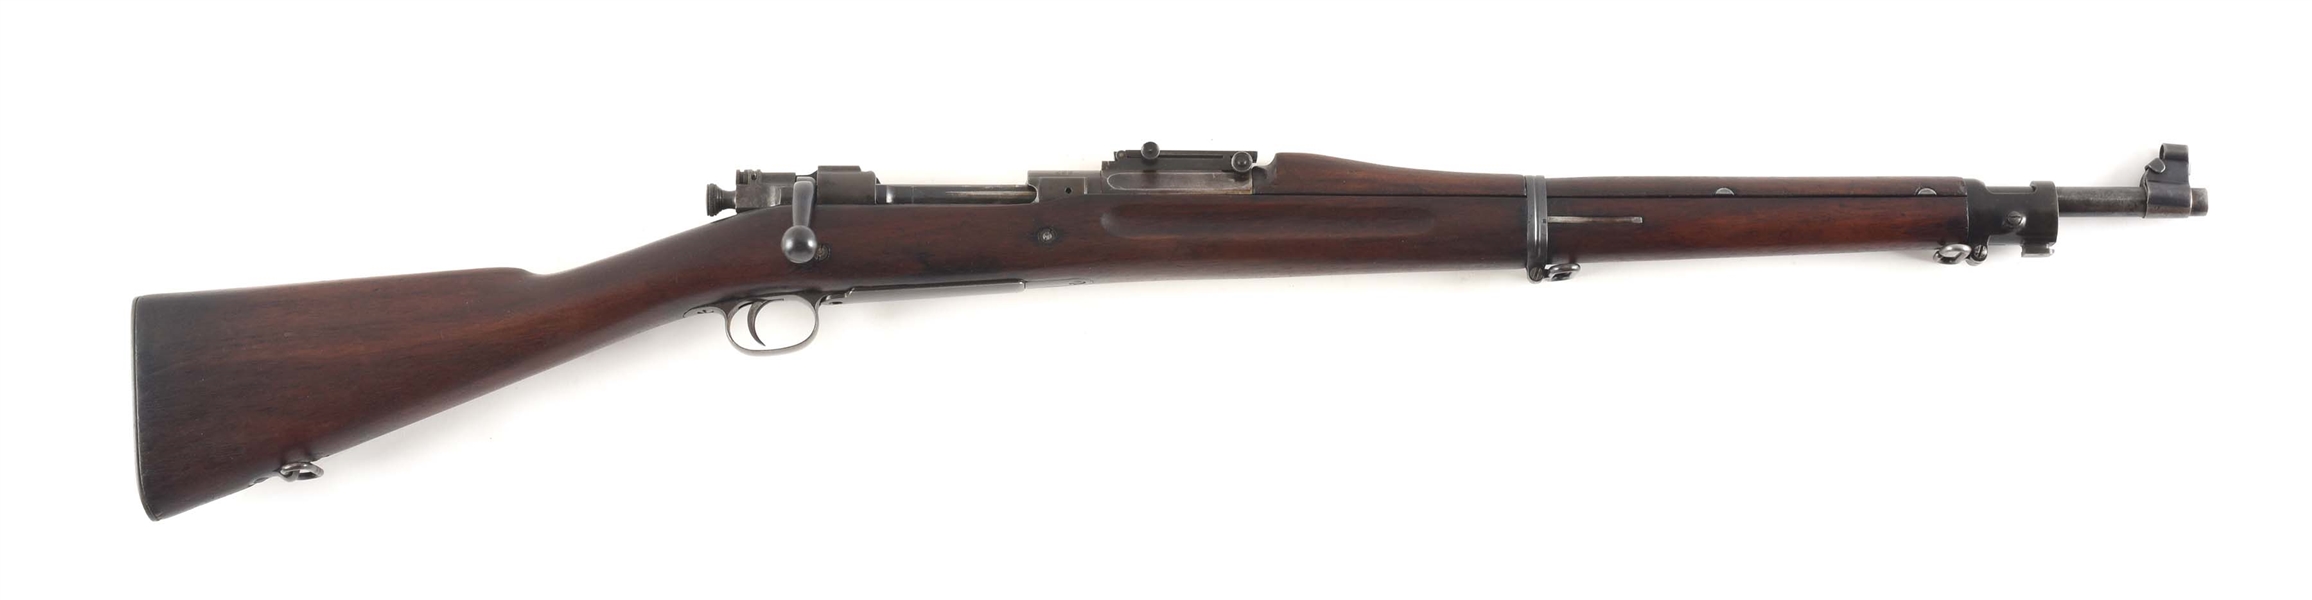 (C) EARLY THREE DIGIT FIRST YEAR PRODUCTION U.S. SPRINGFIELD 1903 BOLT ACTION RIFLE.